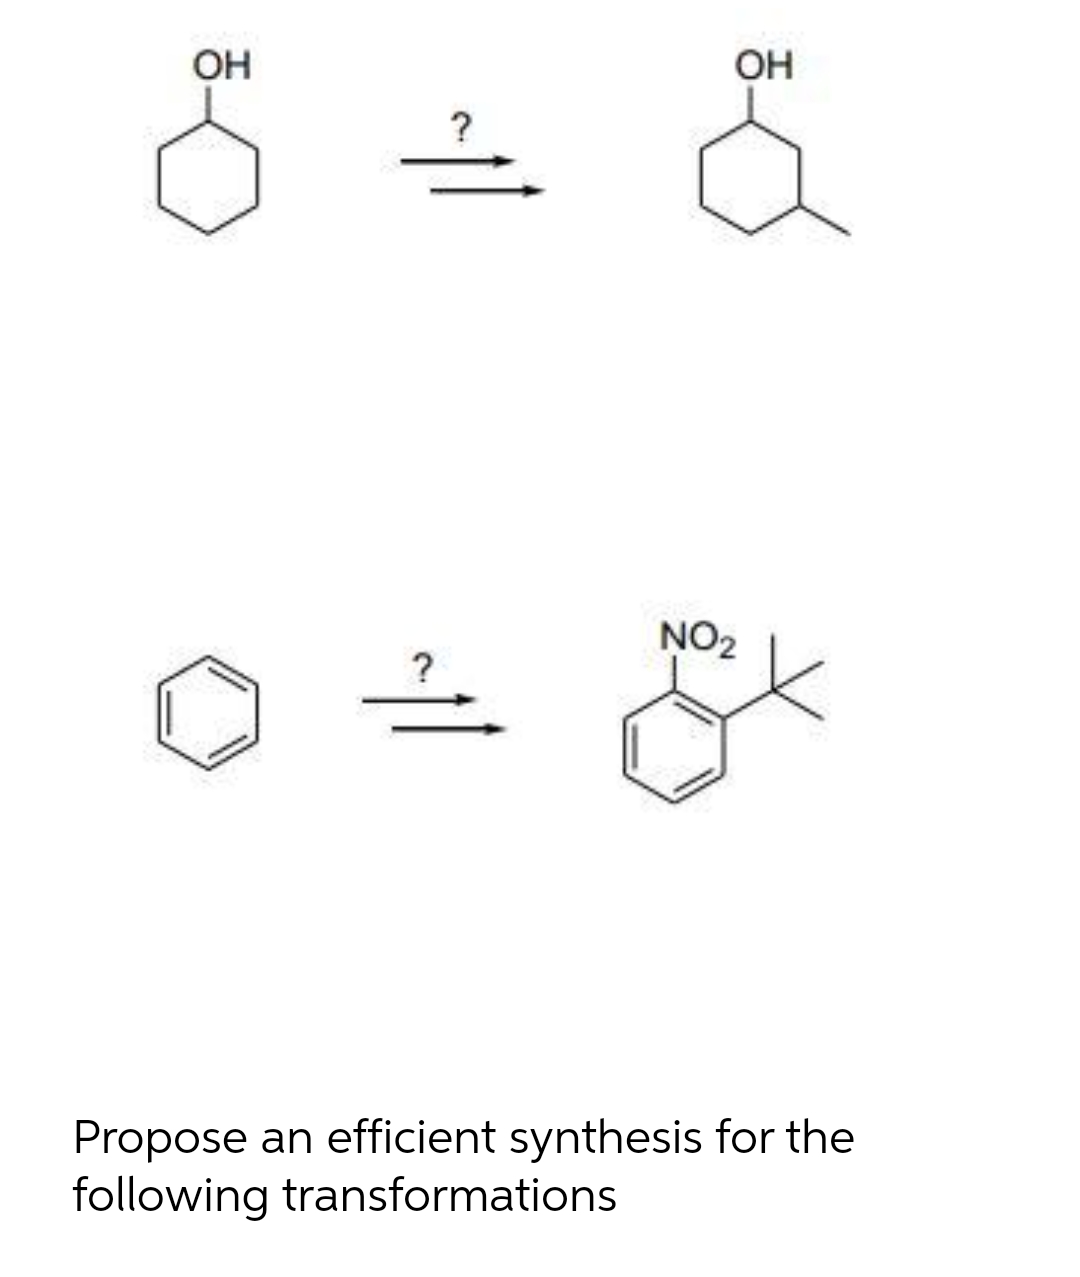 OH
?
11
OH
NO₂
?
Propose an efficient synthesis for the
following transformations